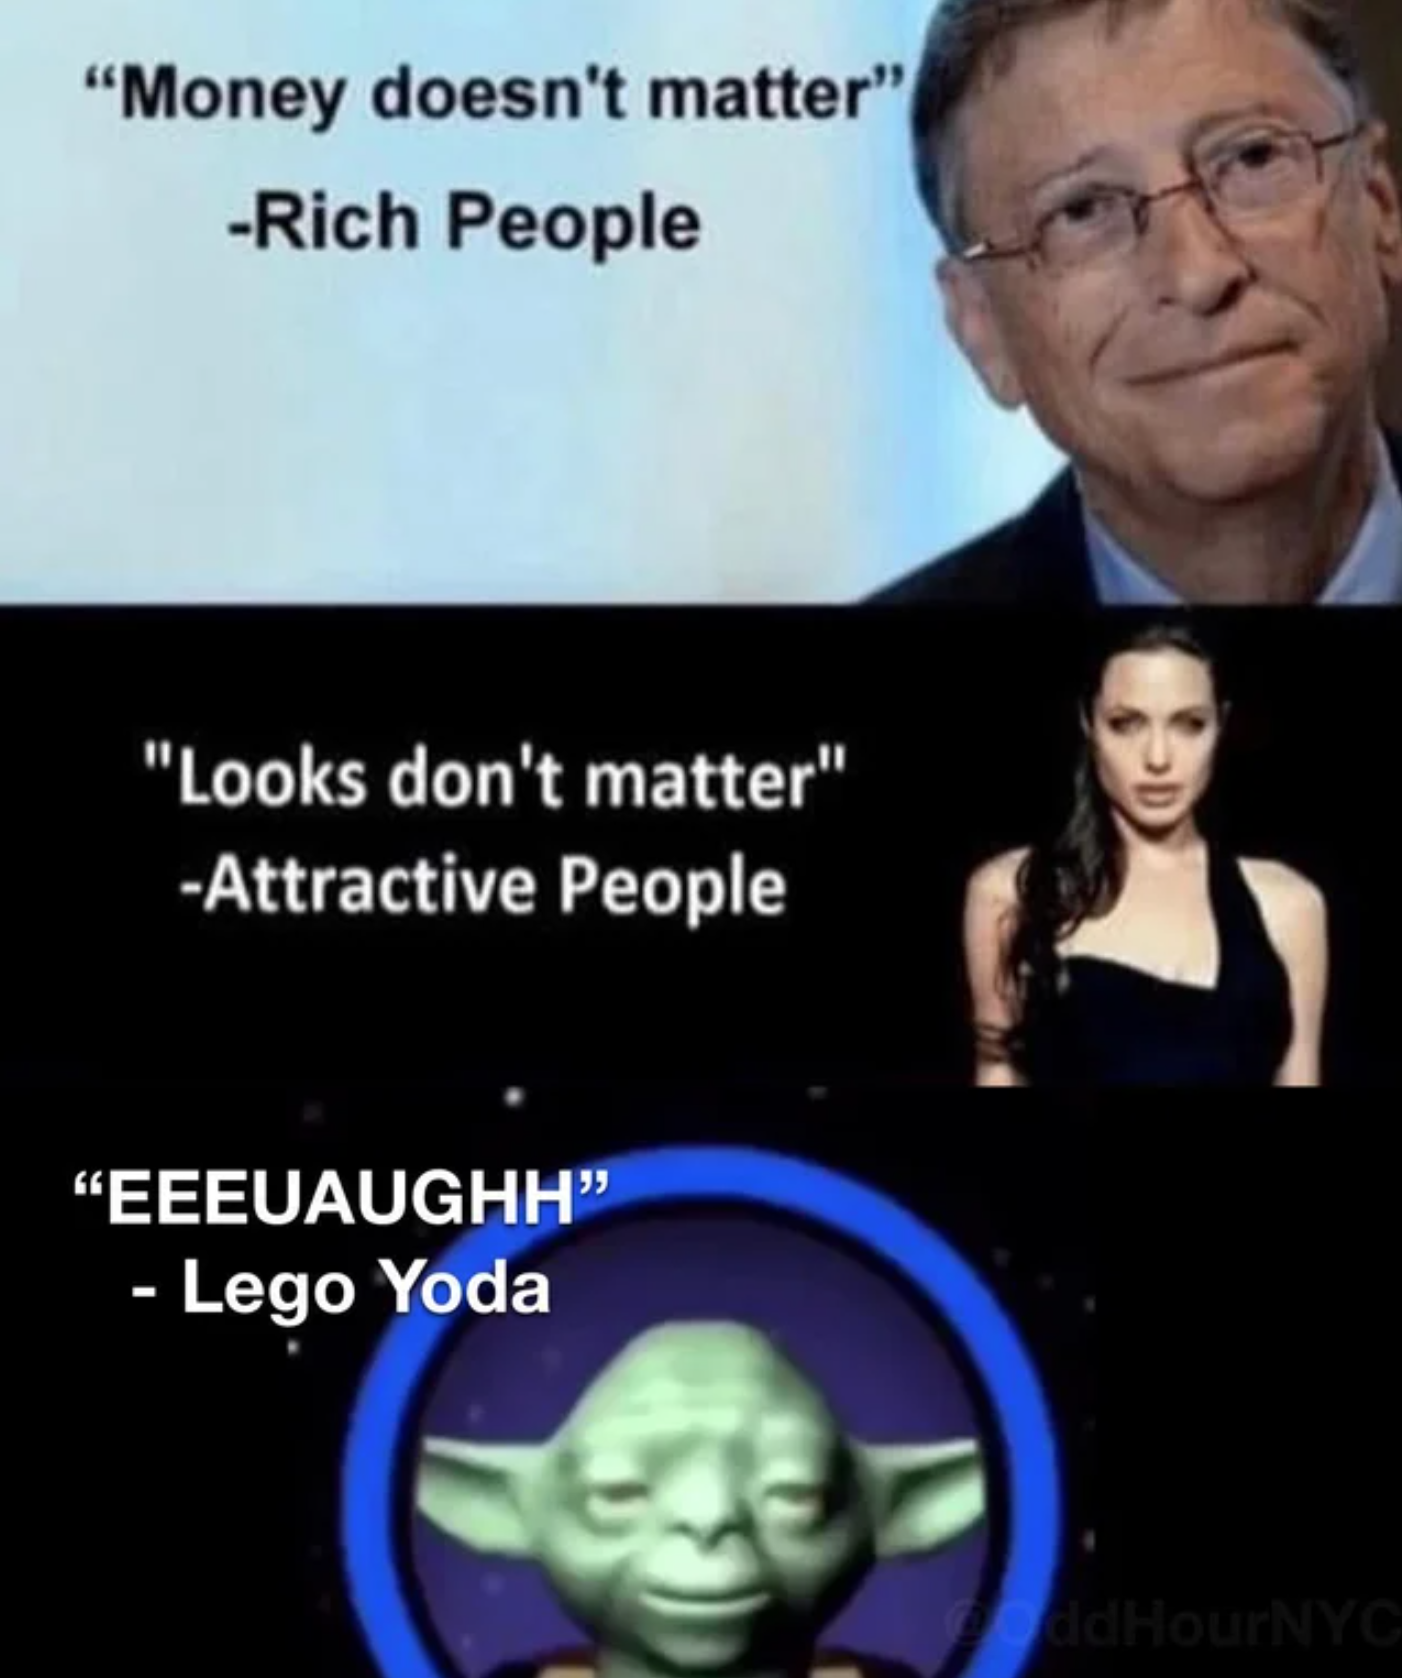 funny gaming memes  - money doesnt matter rich people - "Money doesn't matter" Rich People "Looks don't matter" Attractive People "Eeeuaughh" Lego Yoda Lid Houny